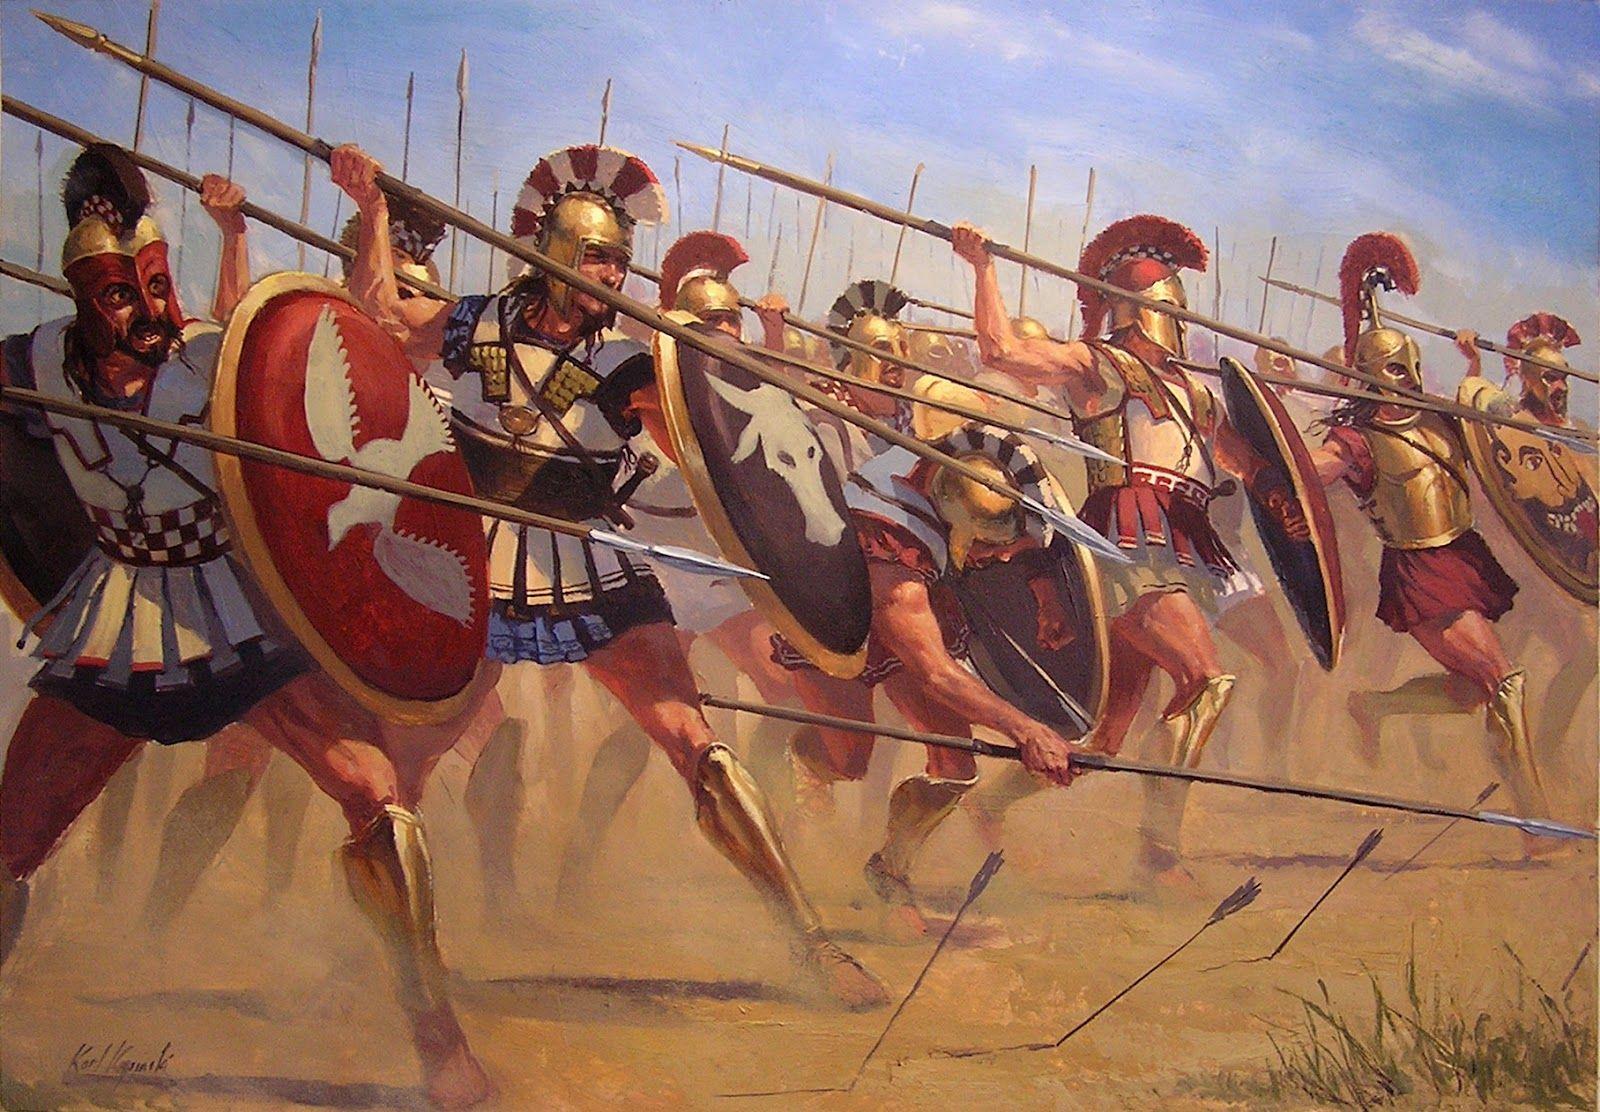 THE GALLIC CELTIC INVASION IN MACEDONIA & THRACE